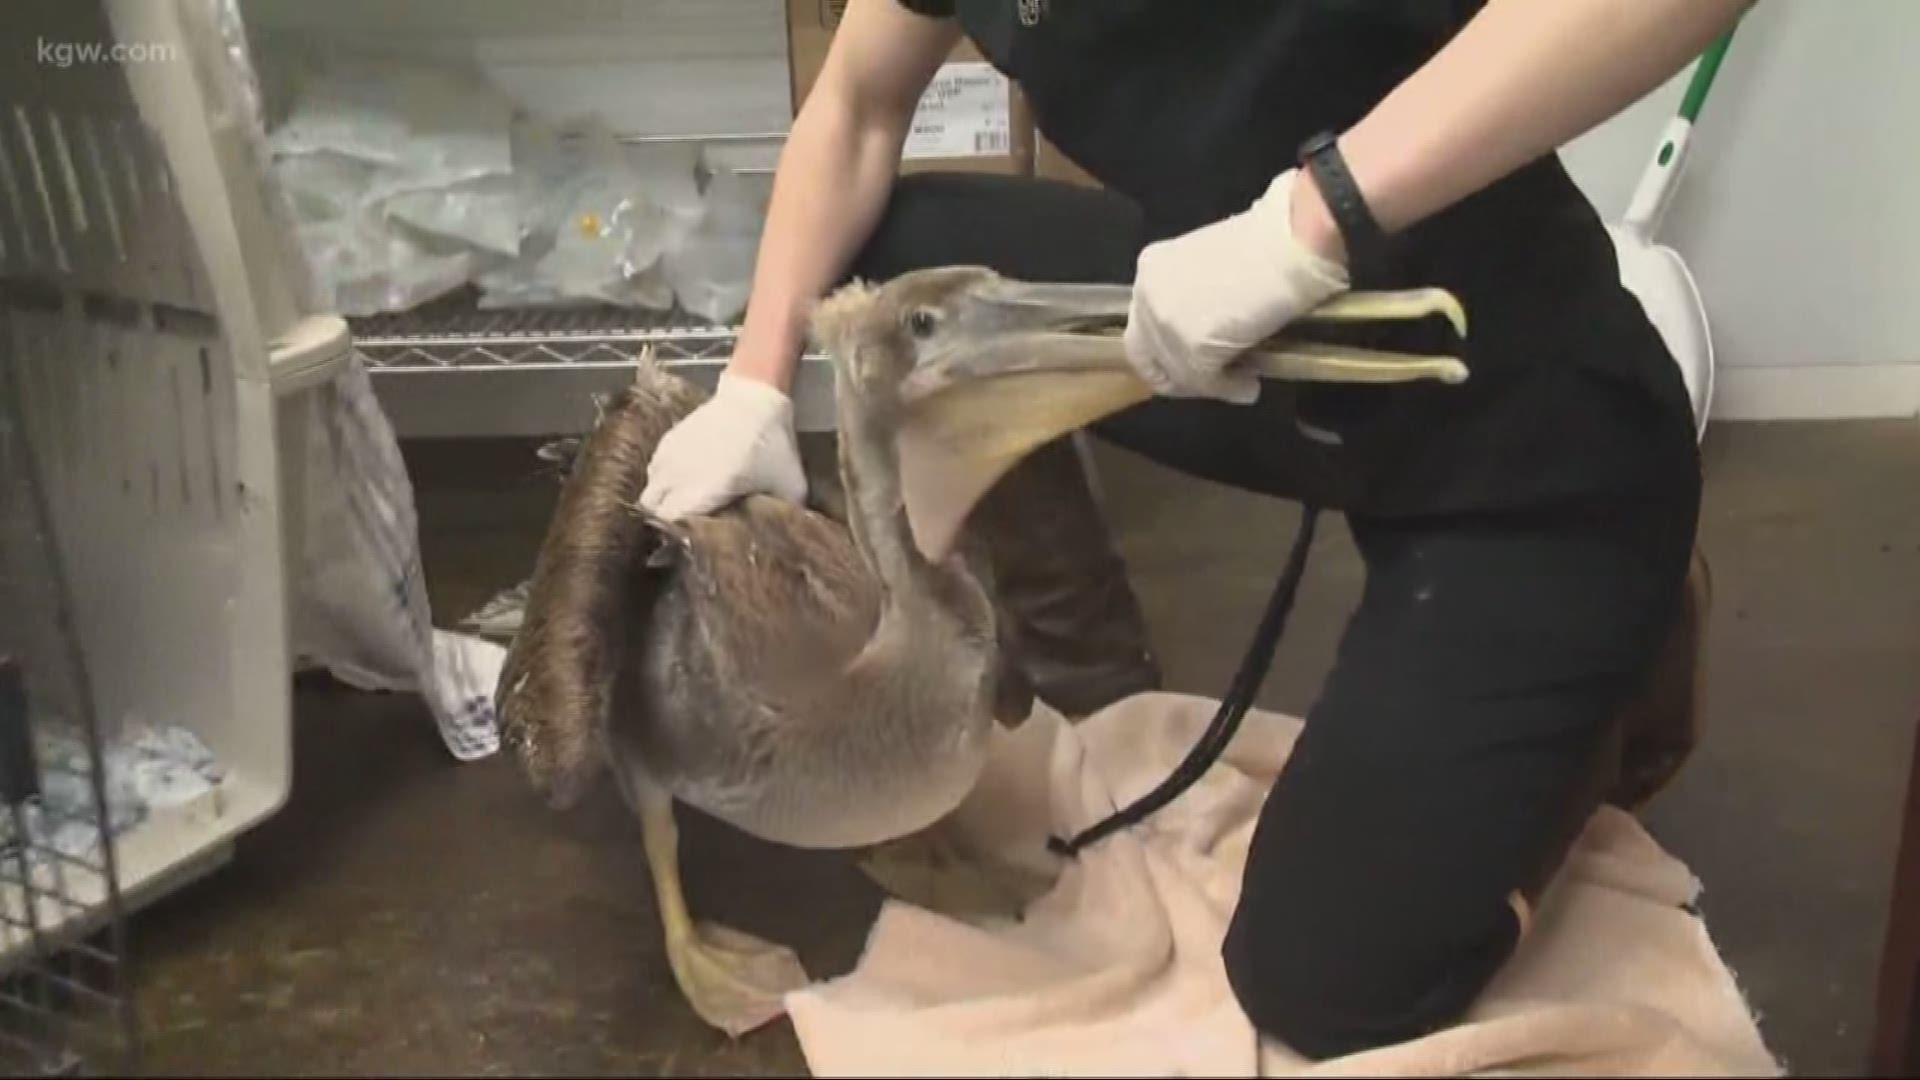 Migrating pelicans were found starving, and are being nursed back to health.